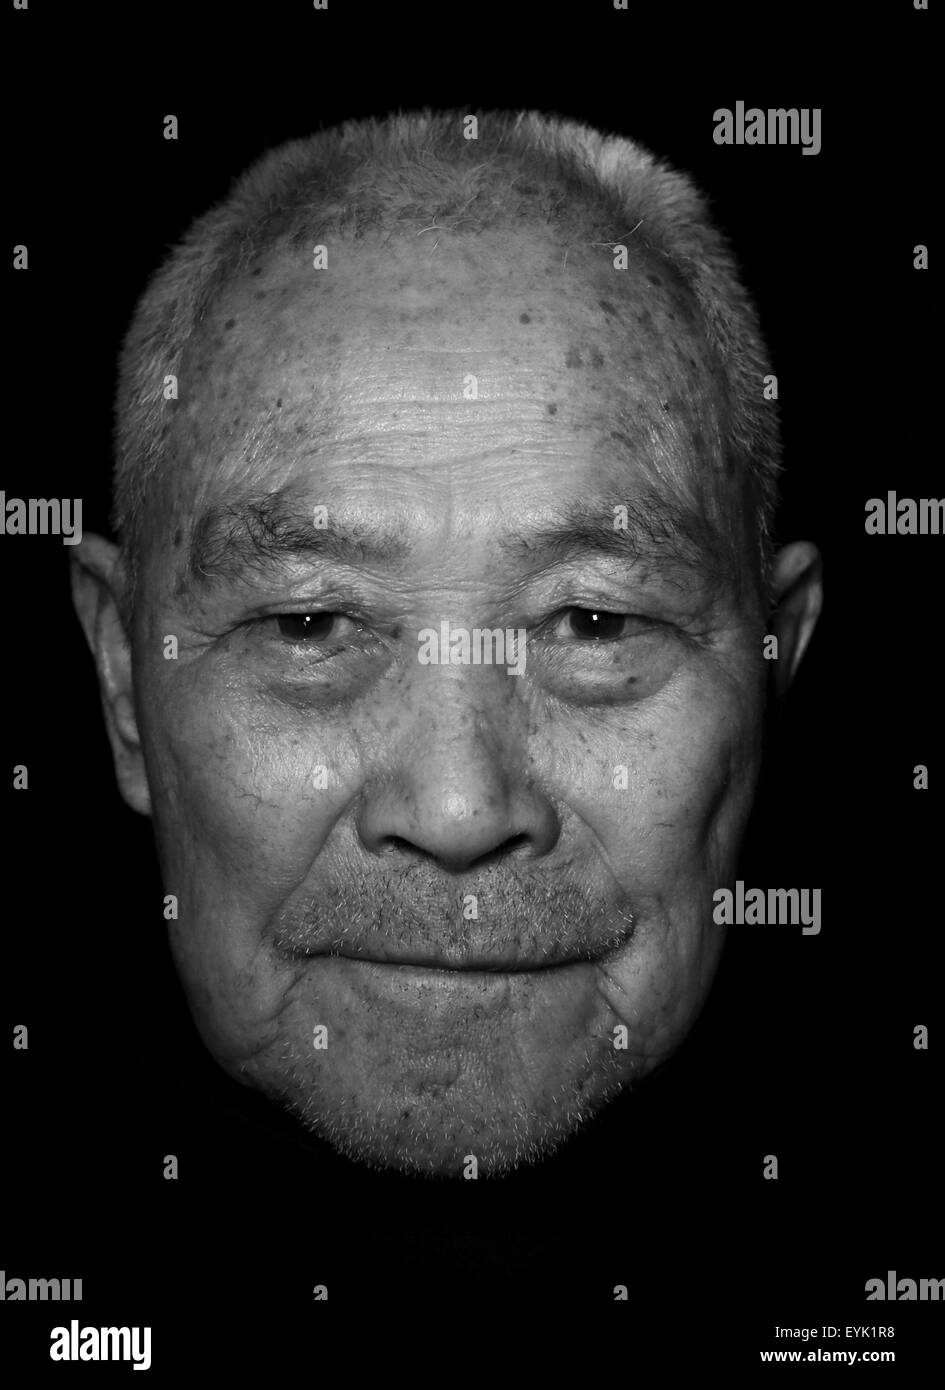 Chn. 25th Mar, 2015. CHINA - March 25 2015: (EDITORIAL USE ONLY. CHINA OUT)(MINIMUM PRICE: 100 USD)Cheng Wenzhan: Male, born in 1925 and now lives in Xiamen Fujian. After his father died in 1938, he went to Tongan and joined the 4th Detachment 2nd Group as a refugee. After 2 months, he turned into a second sergenant using 79 type rifle in 4th company 2nd Battlion 3rd Regiment 2nd Brigade 20th Division new Fujian Army, whose height only 10 cm higher than the rifle. Then joined in 1st squad 1st platoon 7th company 4rd battlion 120 th regiment 40th division 25th corp National revolutional Army Stock Photo